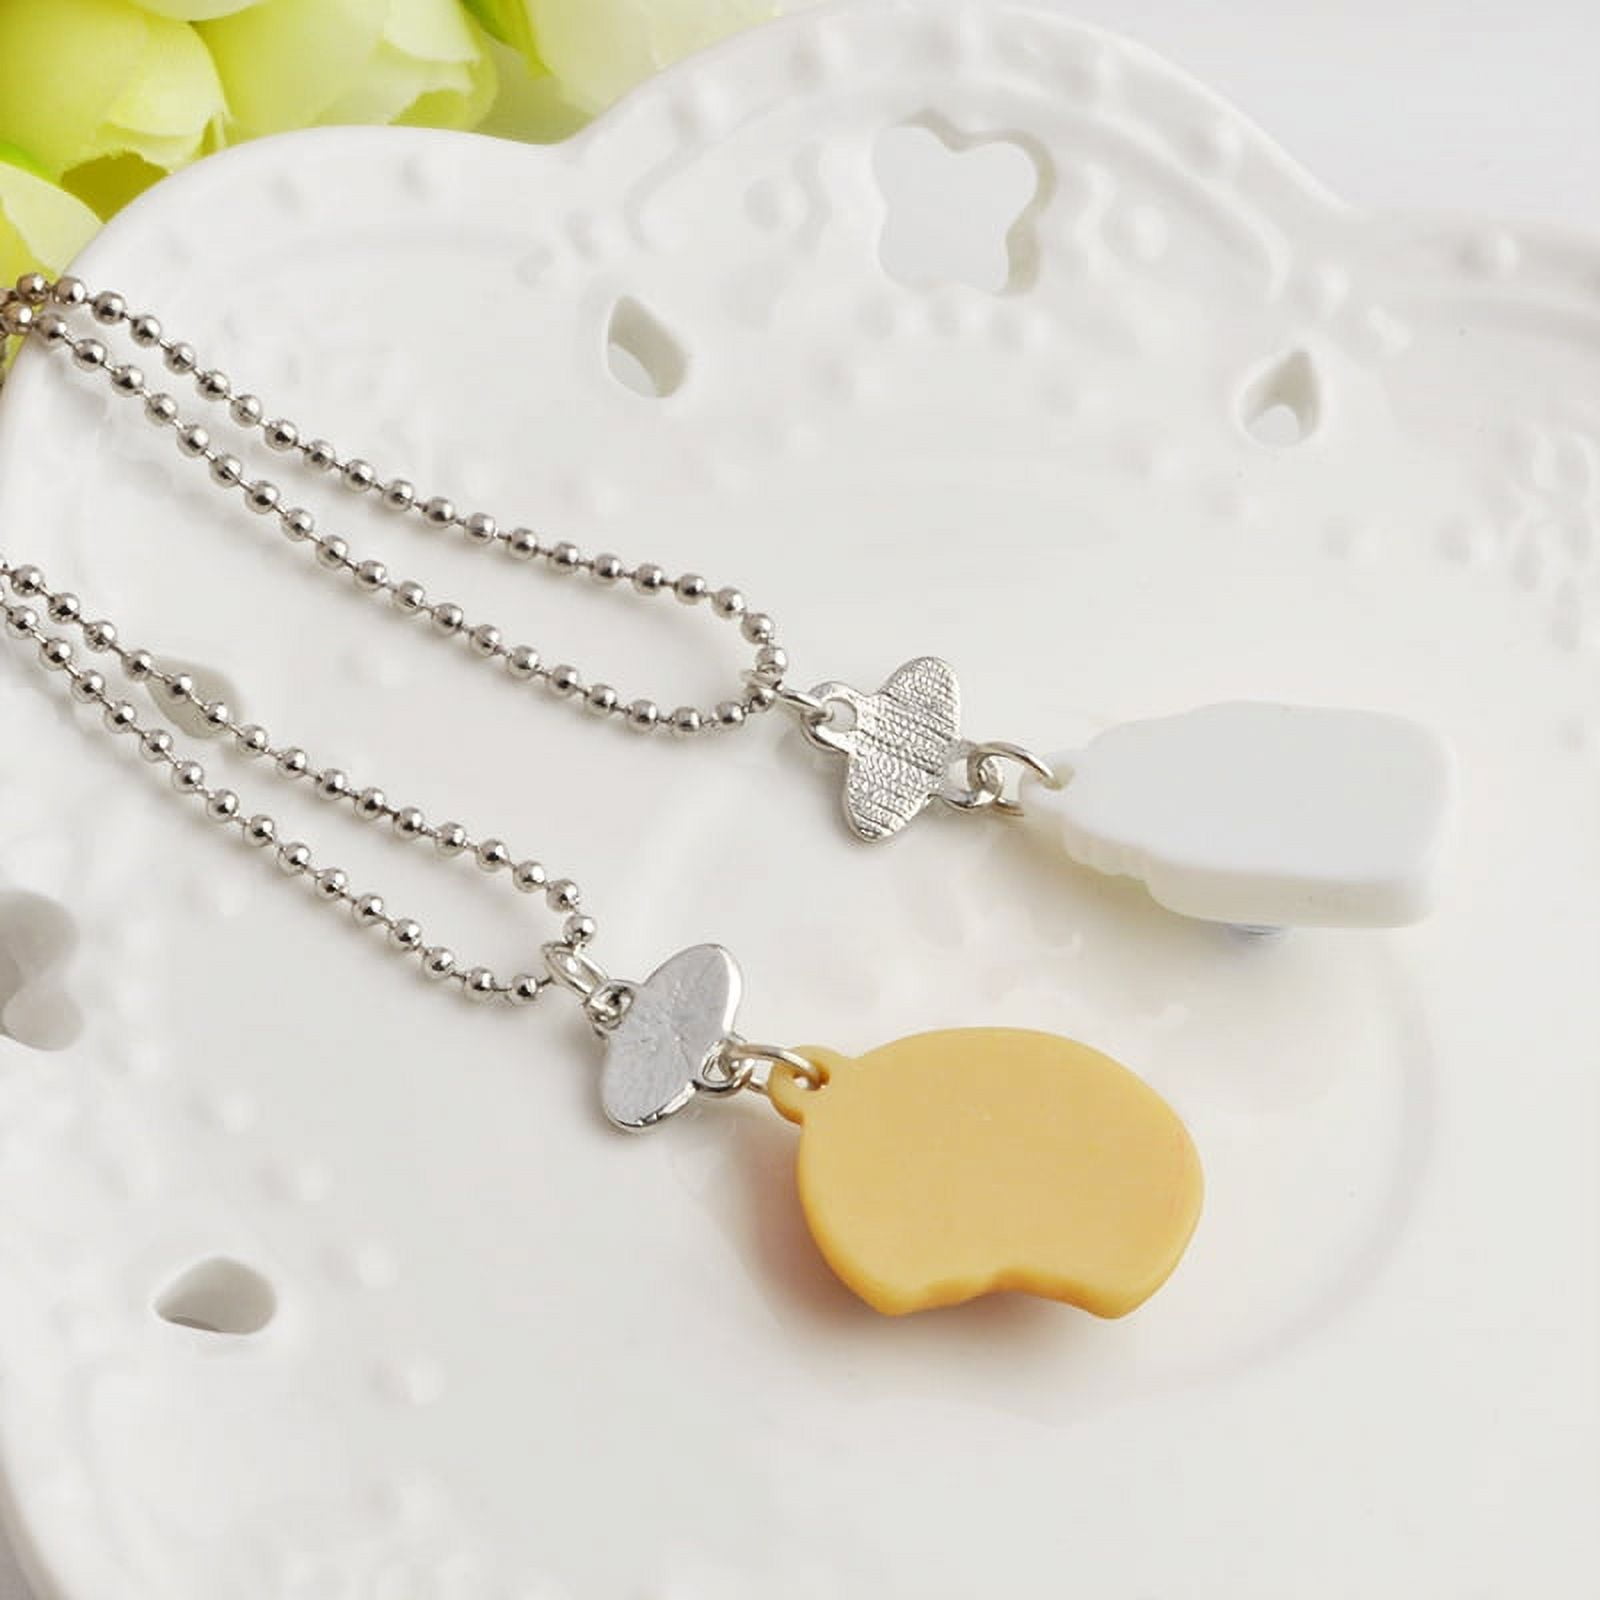 XHBTS 6 Pcs Rainbow Cloud Pendant Necklaces Kids BFF Forever Friendship  Jewelry for Girls Cute Milk and Cookie/Yin Yang Pendant Necklace for  Birthday Gift : Amazon.co.uk: Fashion